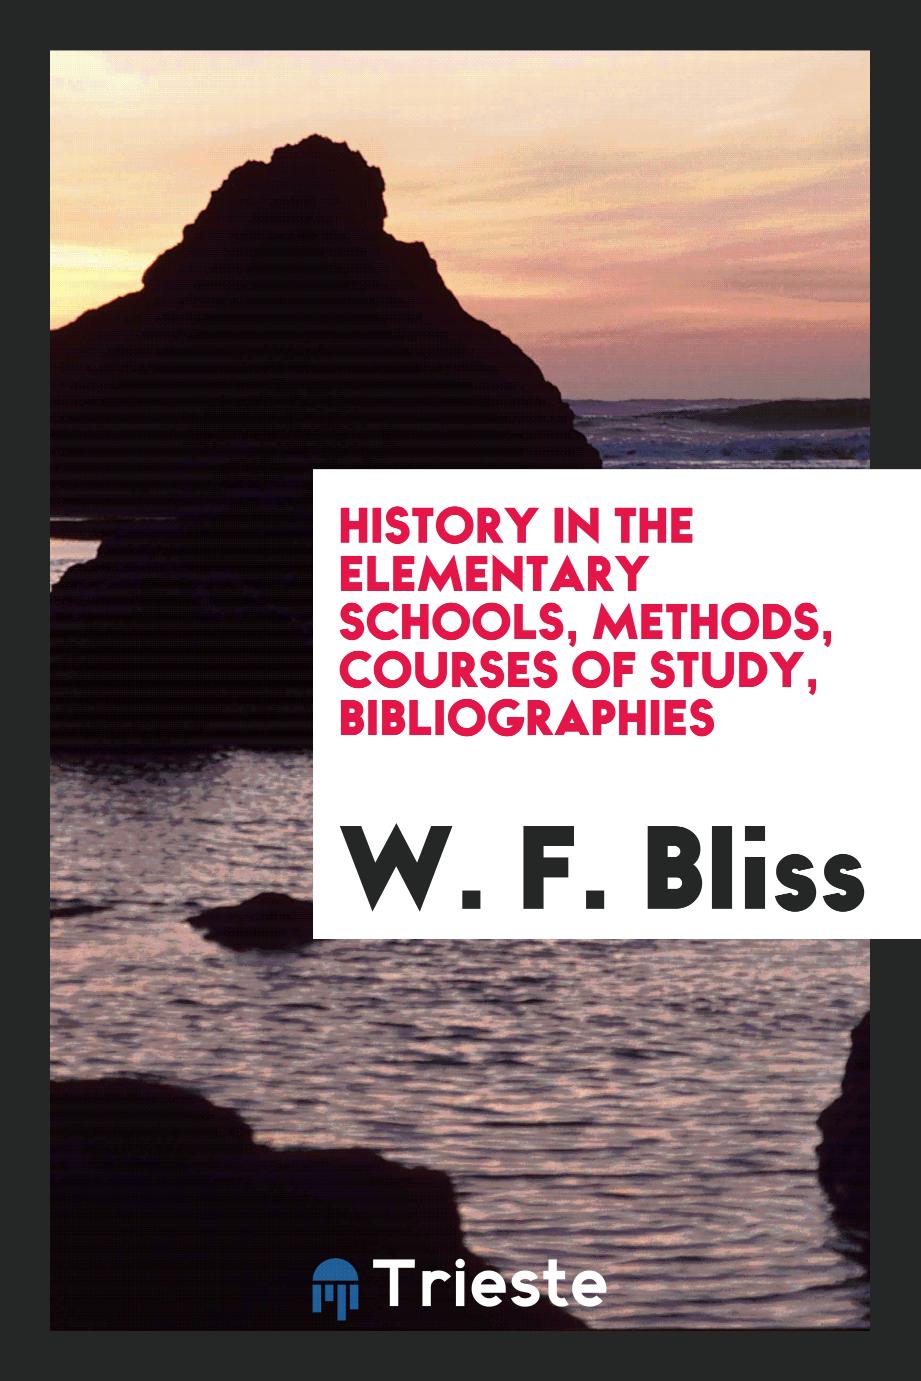 History in the elementary schools, methods, courses of study, bibliographies